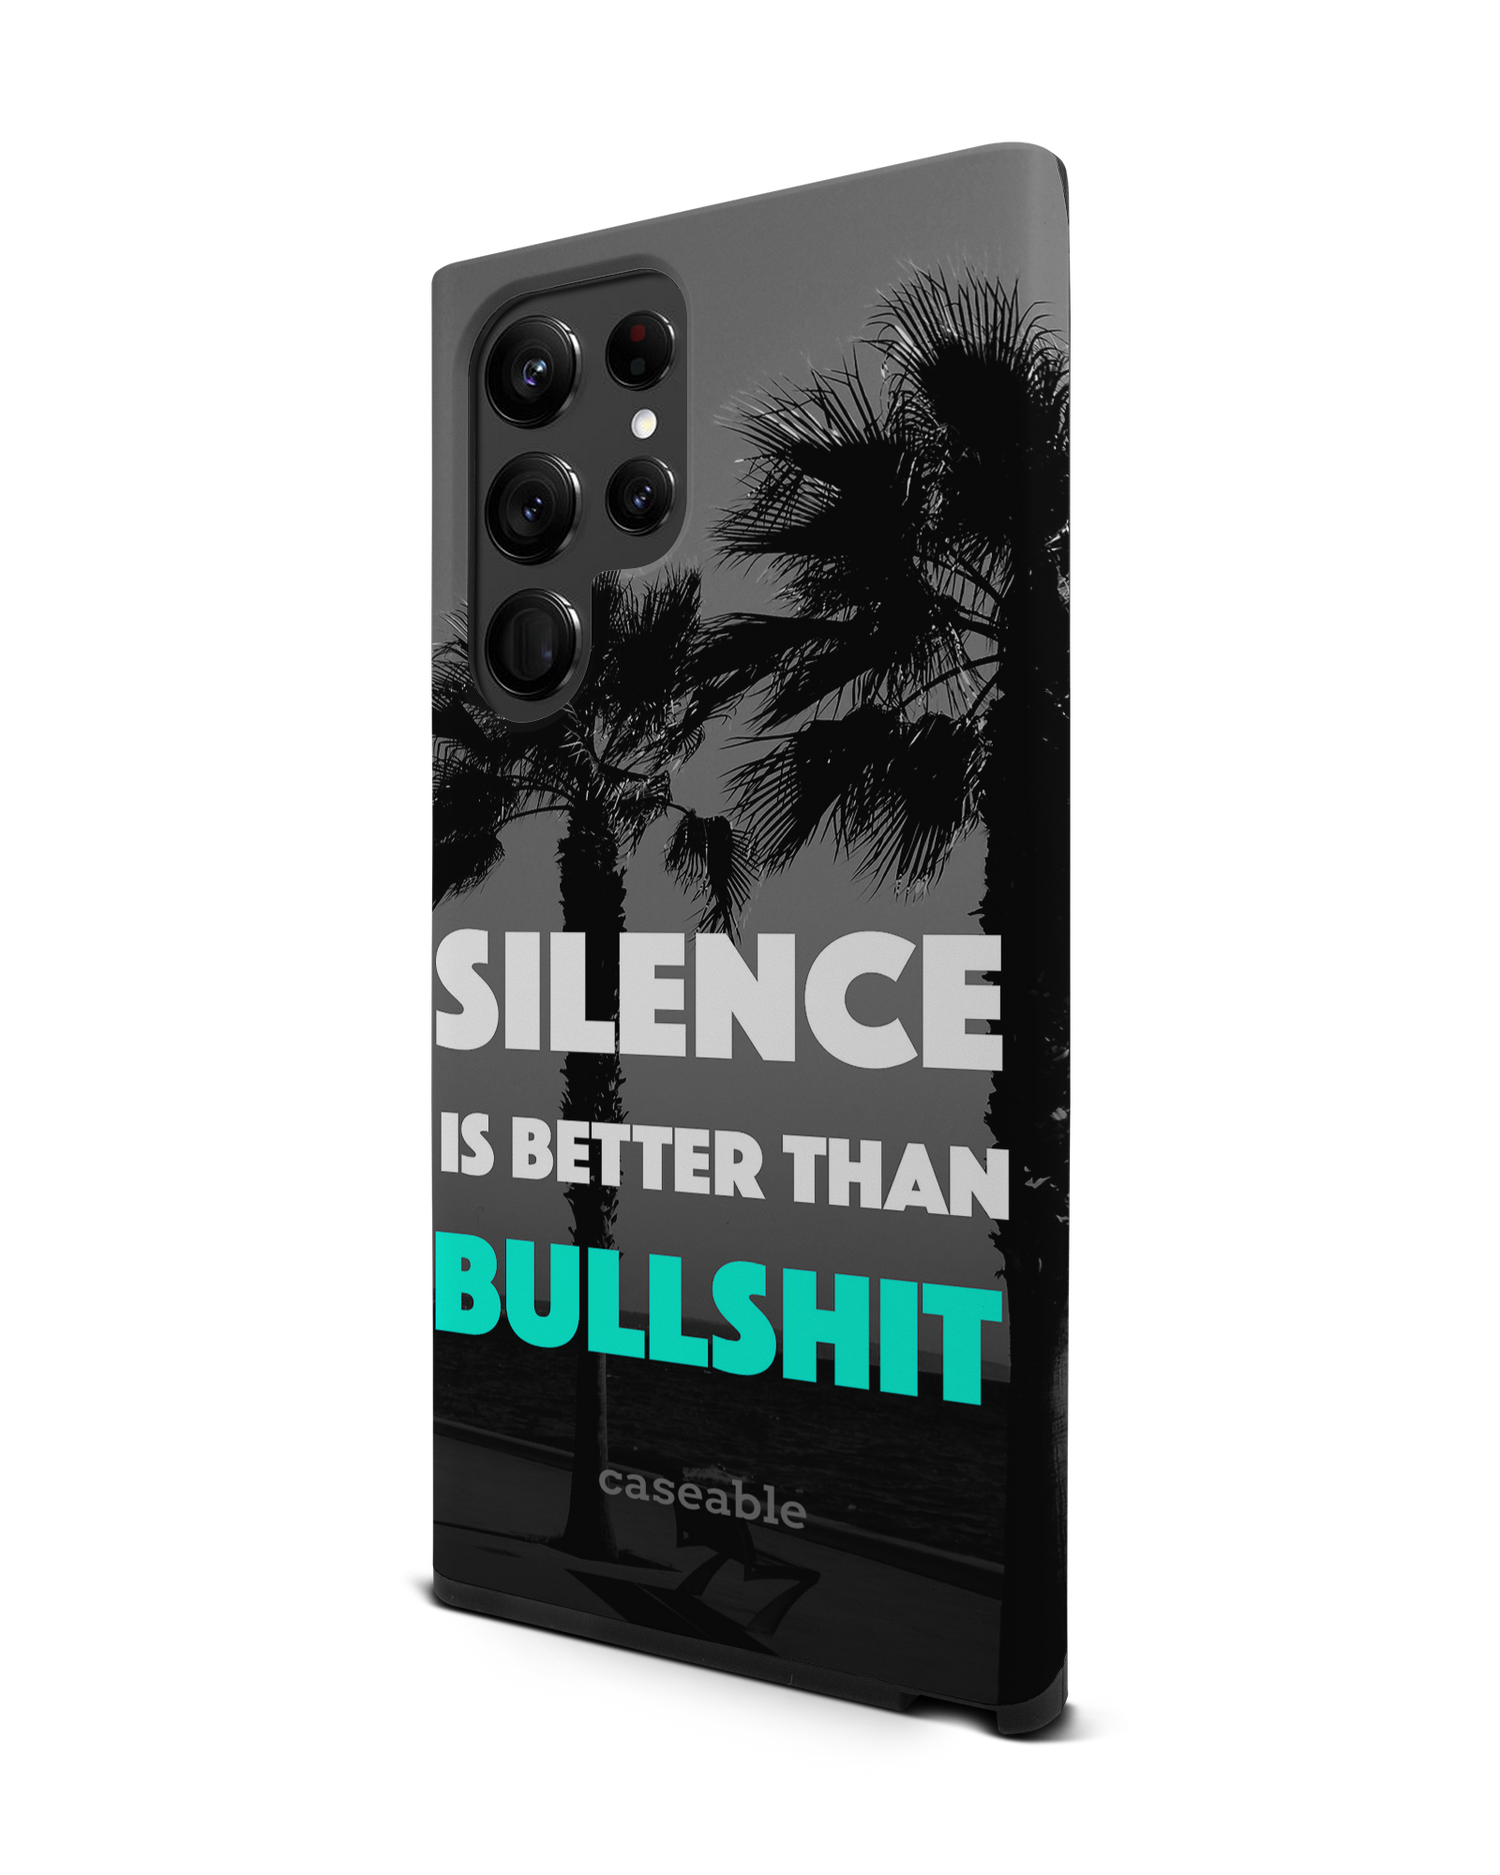 Silence is Better Premium Phone Case Samsung Galaxy S22 Ultra 5G: View from the right side